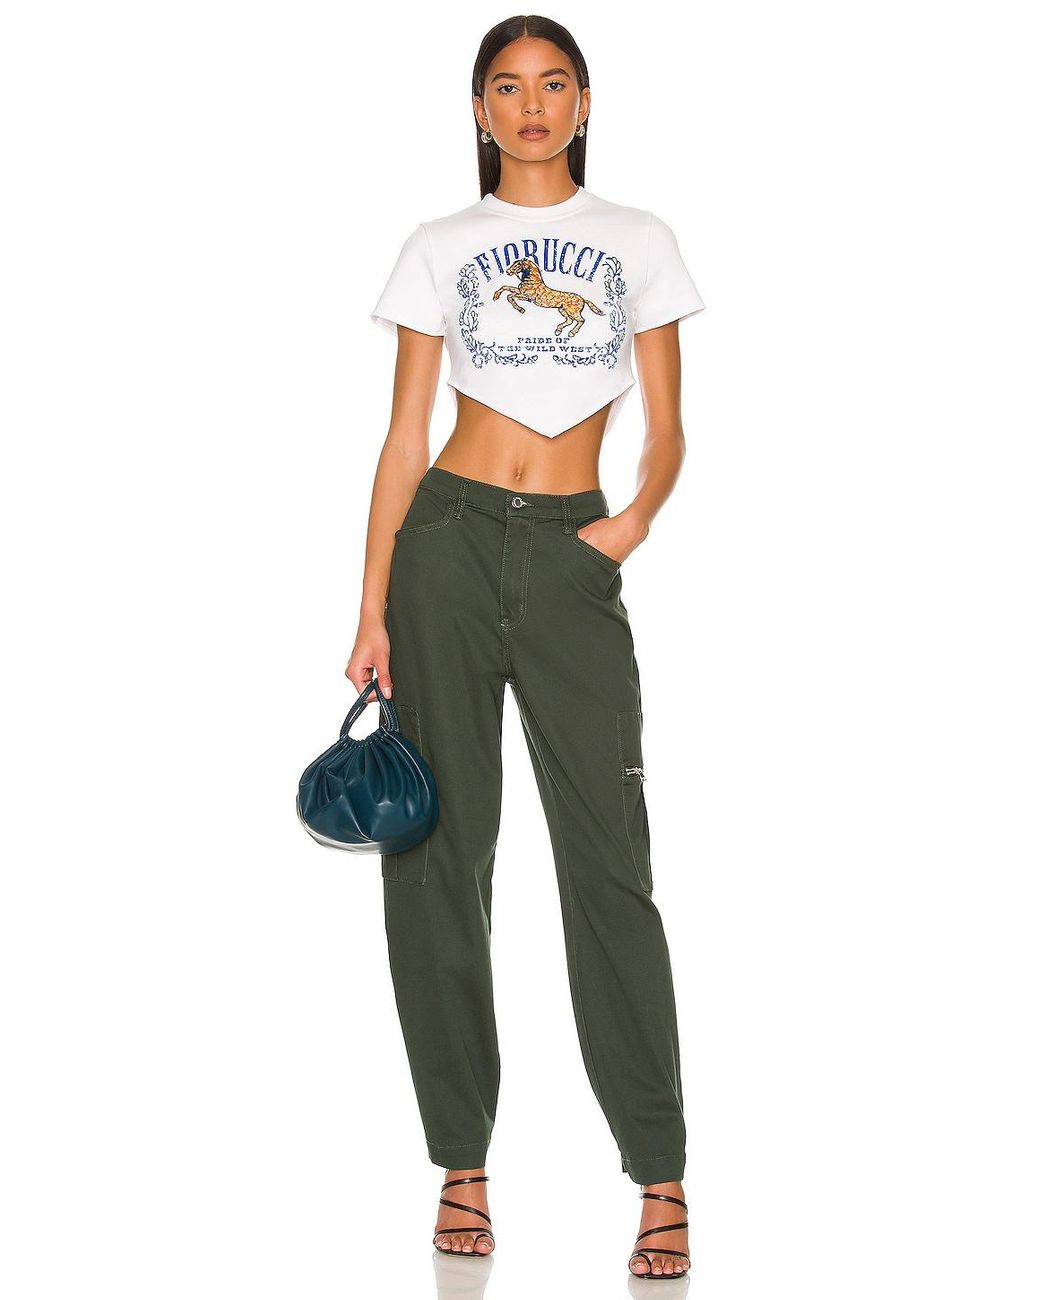 Fiorucci Pride Of The Wild West Top | Lyst